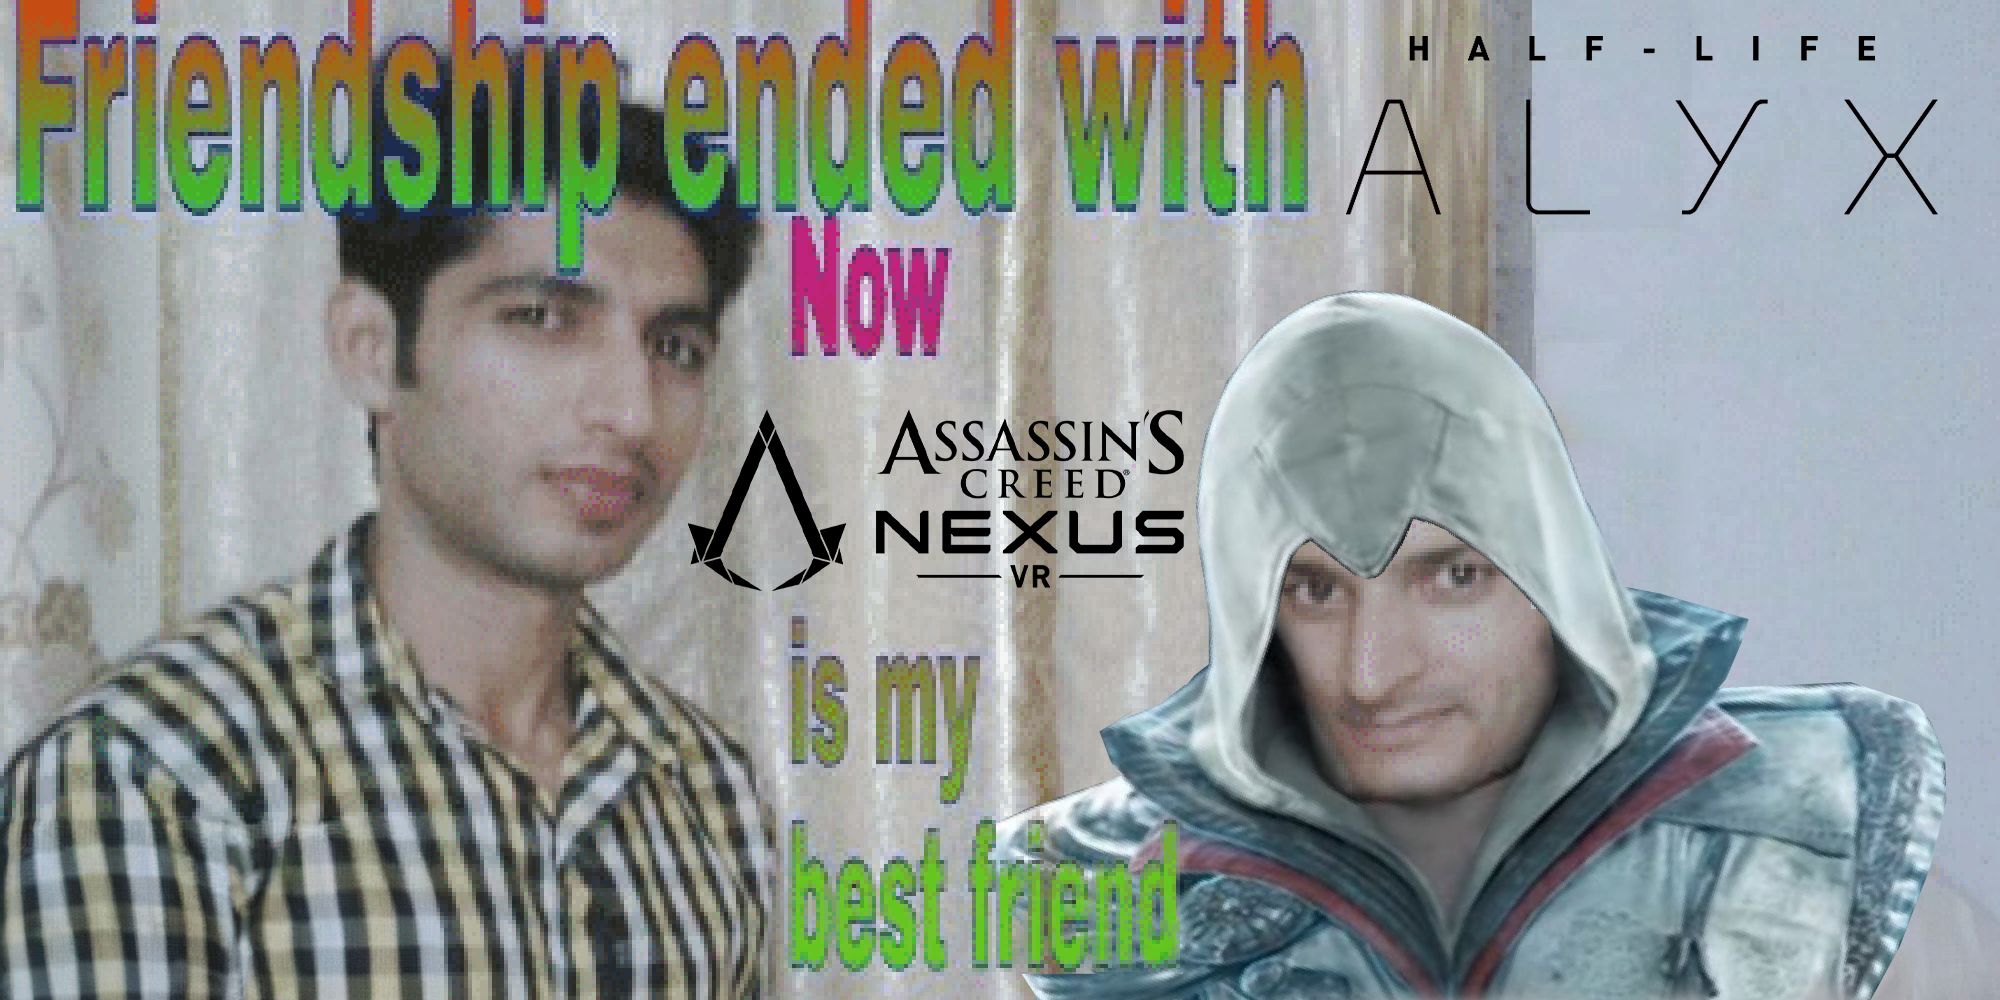 Assassins Creed Nexus vs Half-Life Alyx in the Friendship Ended meme format